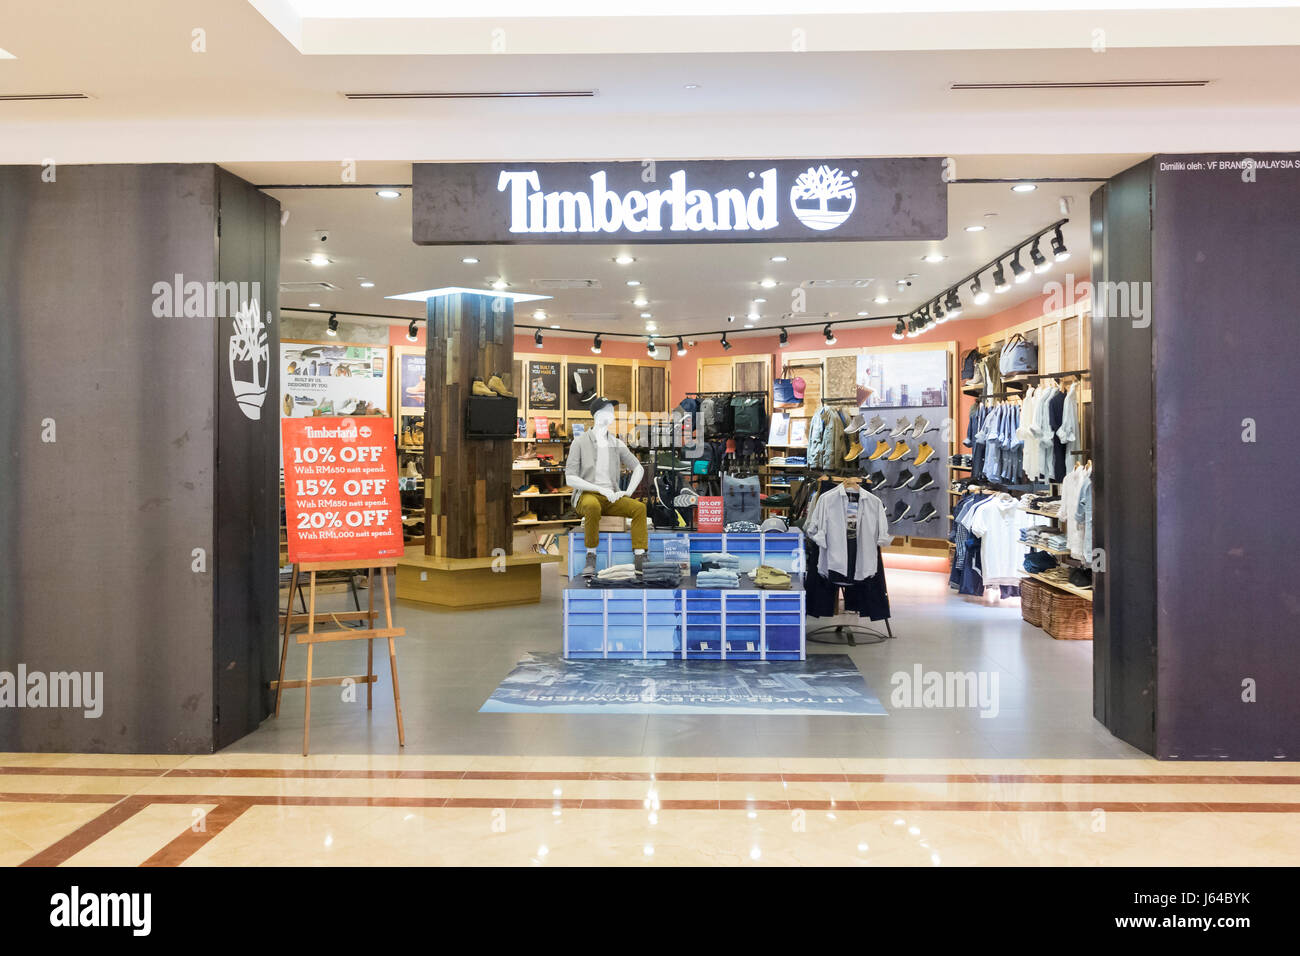 Timberland Sign High Resolution Stock Photography and Images - Alamy